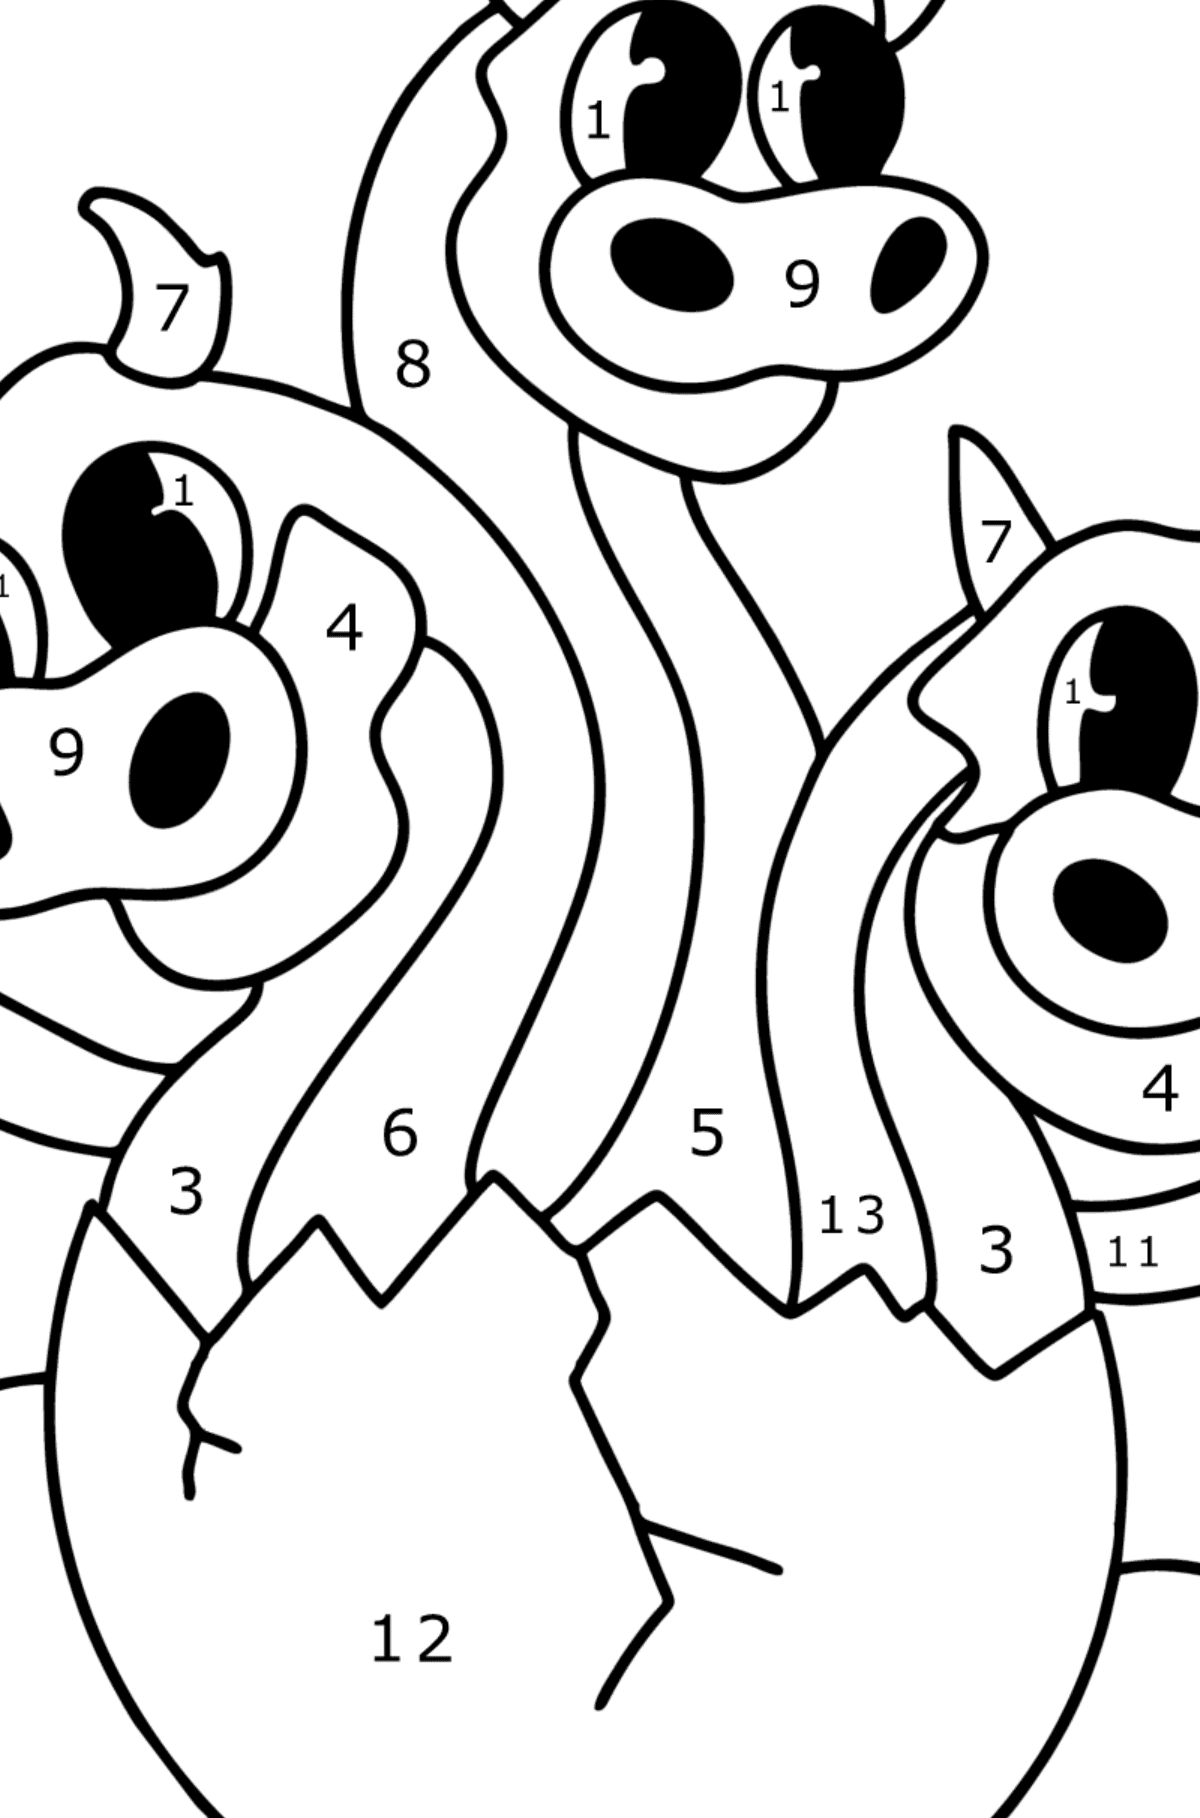 Dragon with three heads coloring page - Coloring by Numbers for Kids